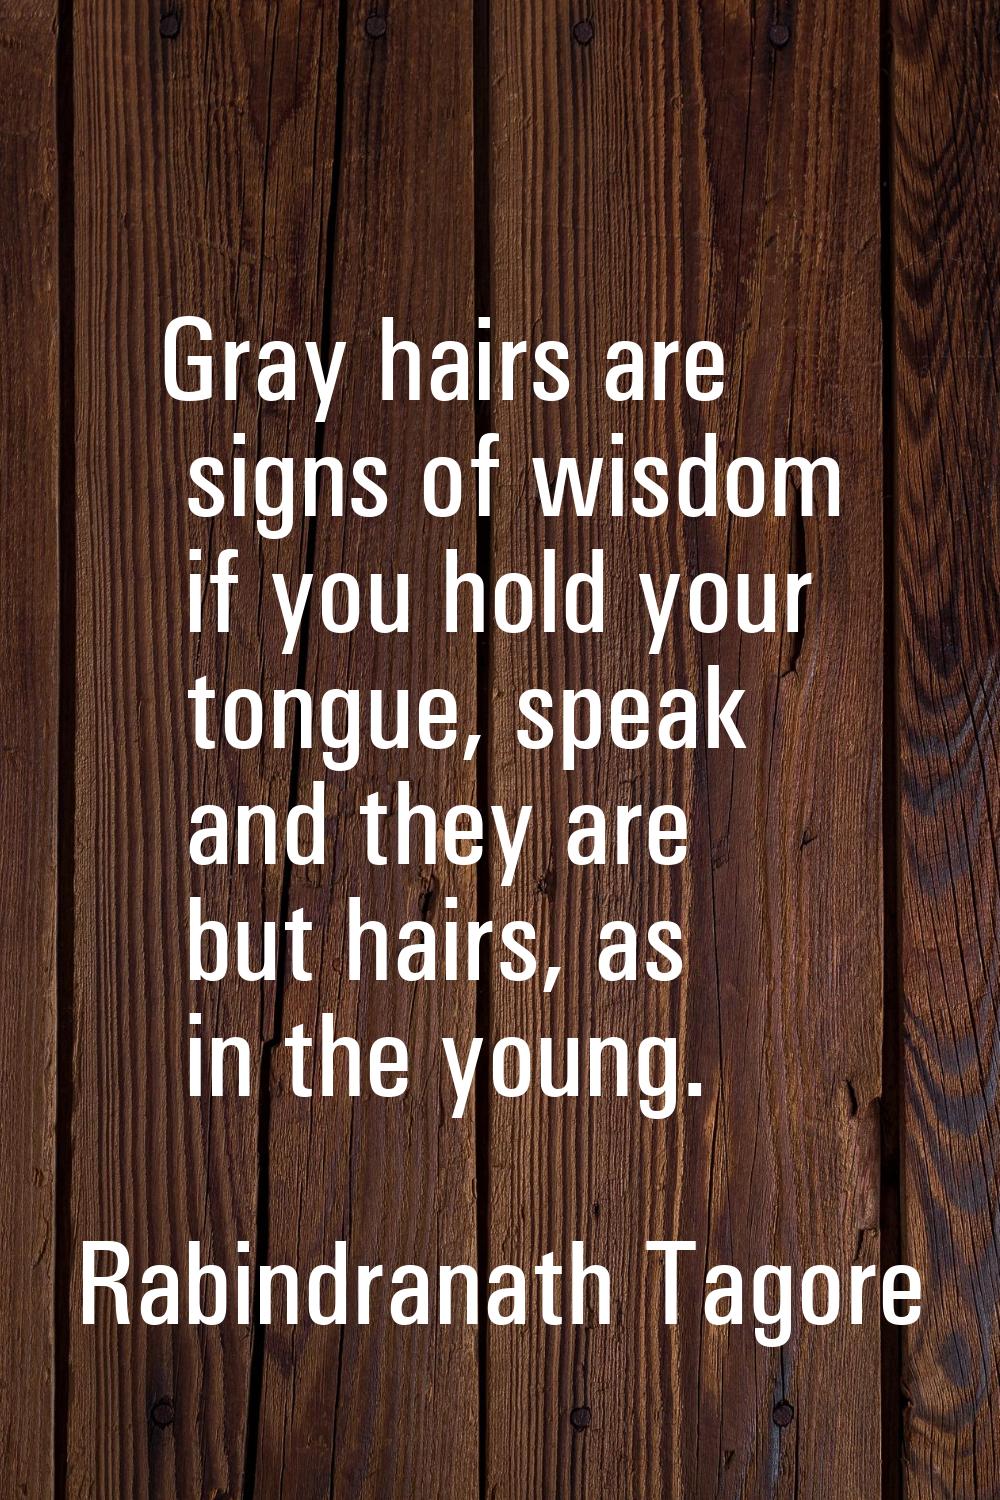 Gray hairs are signs of wisdom if you hold your tongue, speak and they are but hairs, as in the you